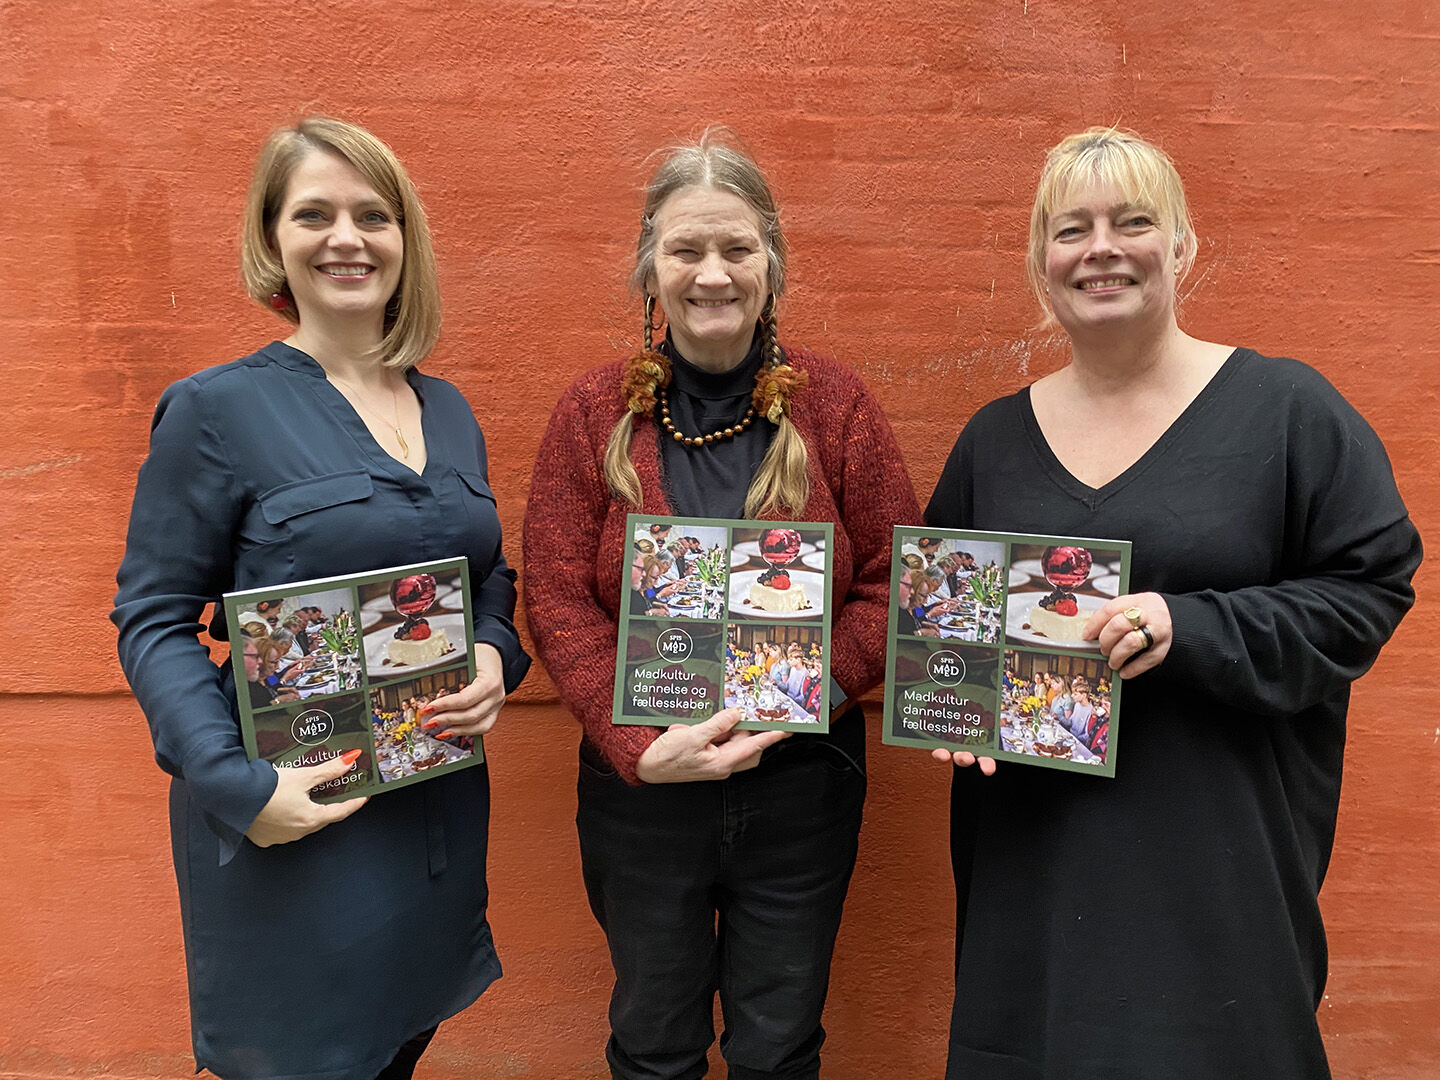 Project manager Vibeke Knöchel Christensen, project manager Anna-Elisabeth Jensen and museum director Ulla Schaltz each with a copy of the project Spis Ma/eD's white book